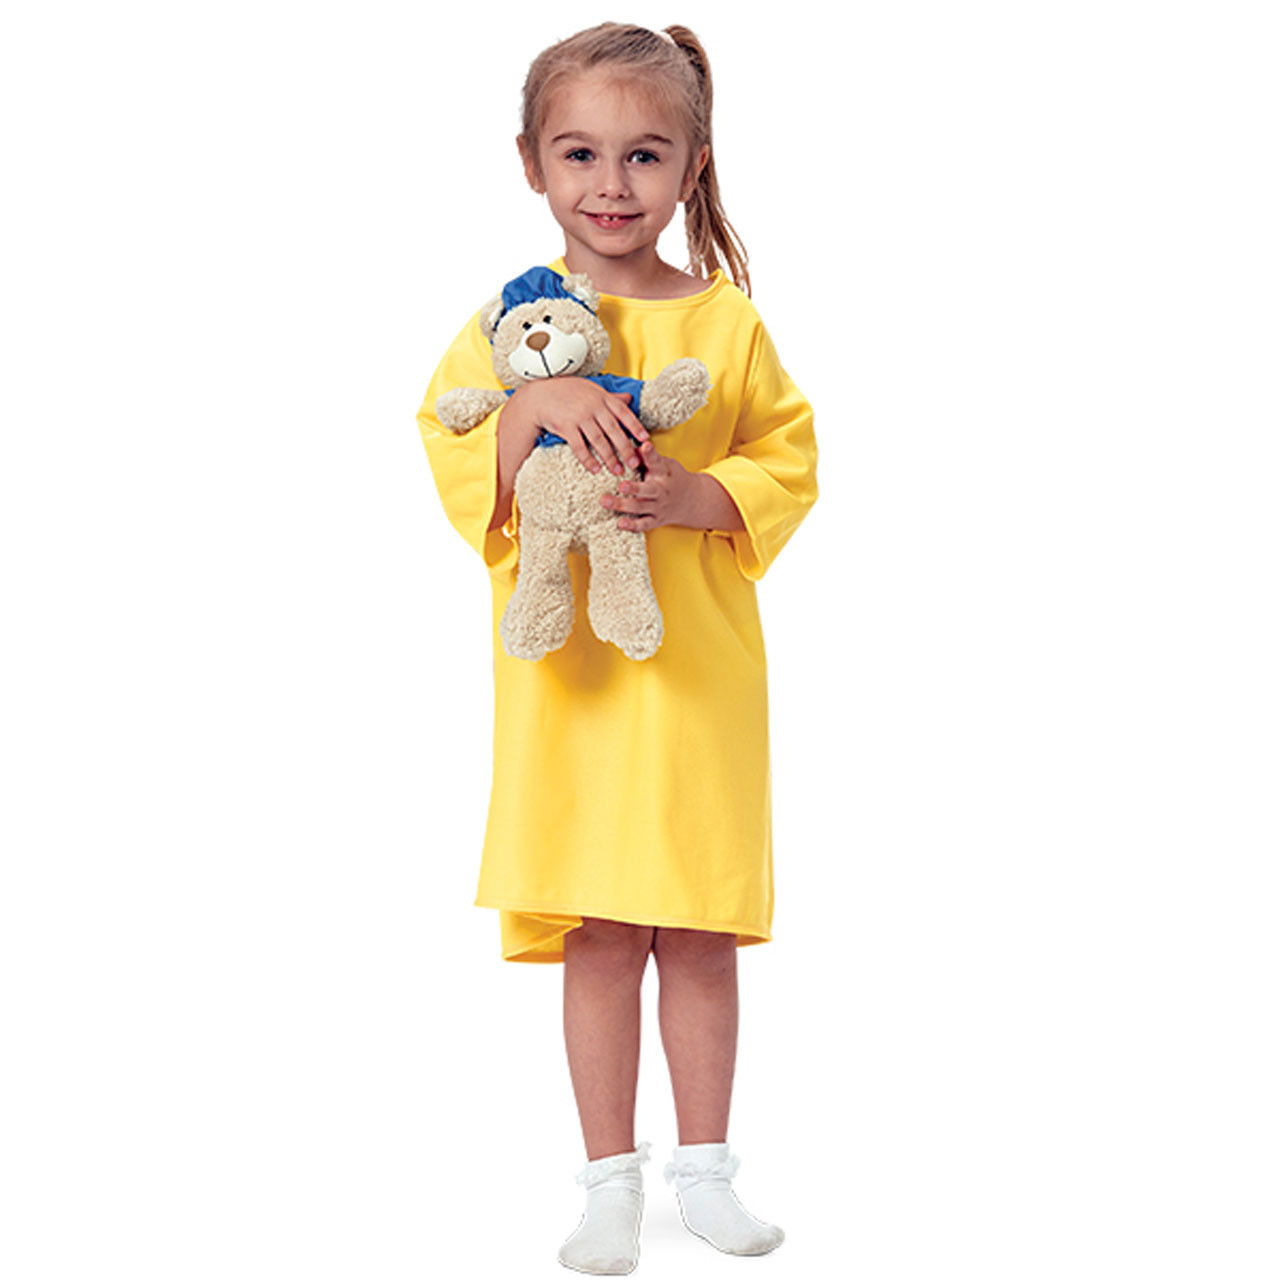 Kids Hospital Gowns, Yellow- In Bulk Case of 12 or 72 Questions & Answers